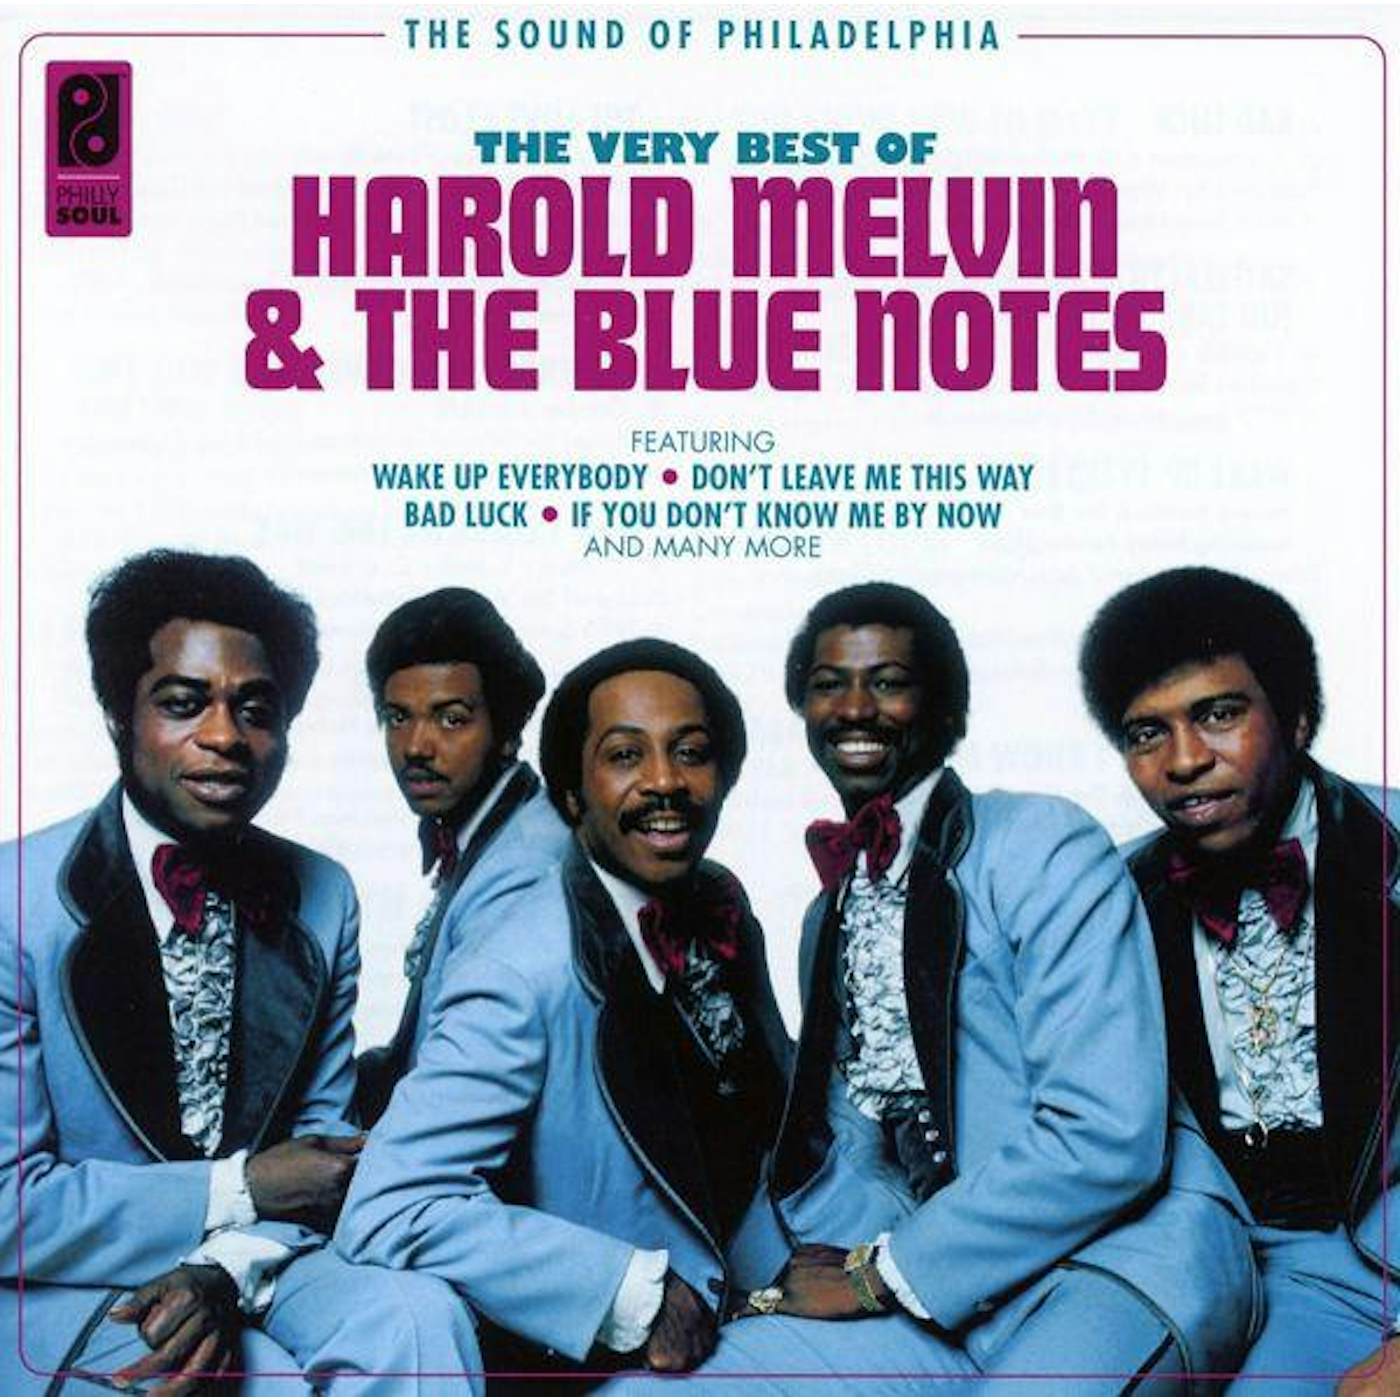 HAROLD MELVIN & THE BLUE NOTES - THE VERY BEST OF CD